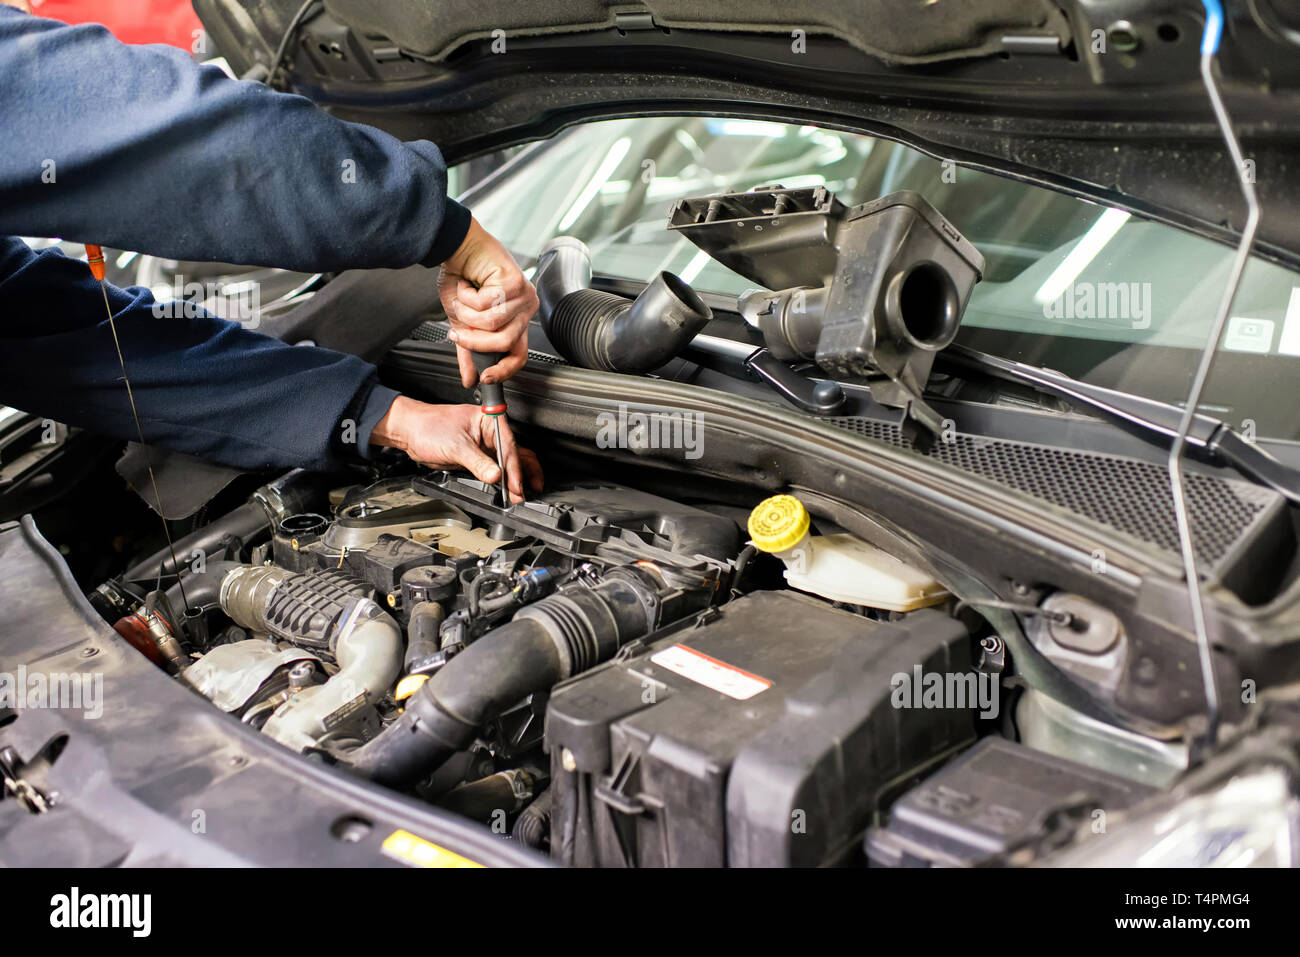 Mechanic working on a car engine doing repairs or servicing maintenance in a closeup view of his hands using a screwdriver Stock Photo